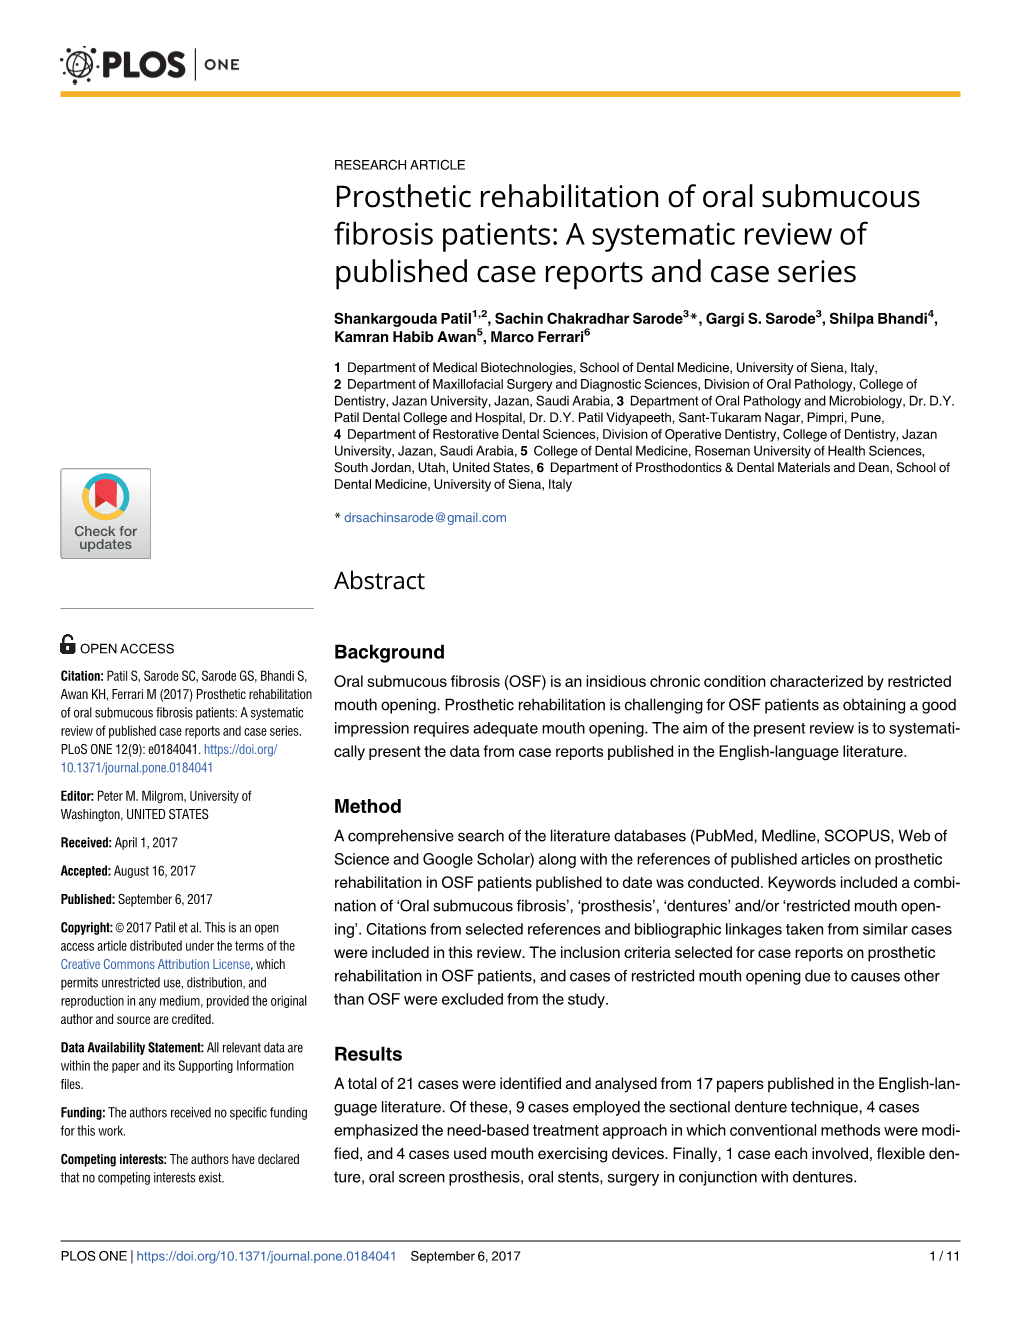 Prosthetic Rehabilitation of Oral Submucous Fibrosis Patients: a Systematic Review of Published Case Reports and Case Series